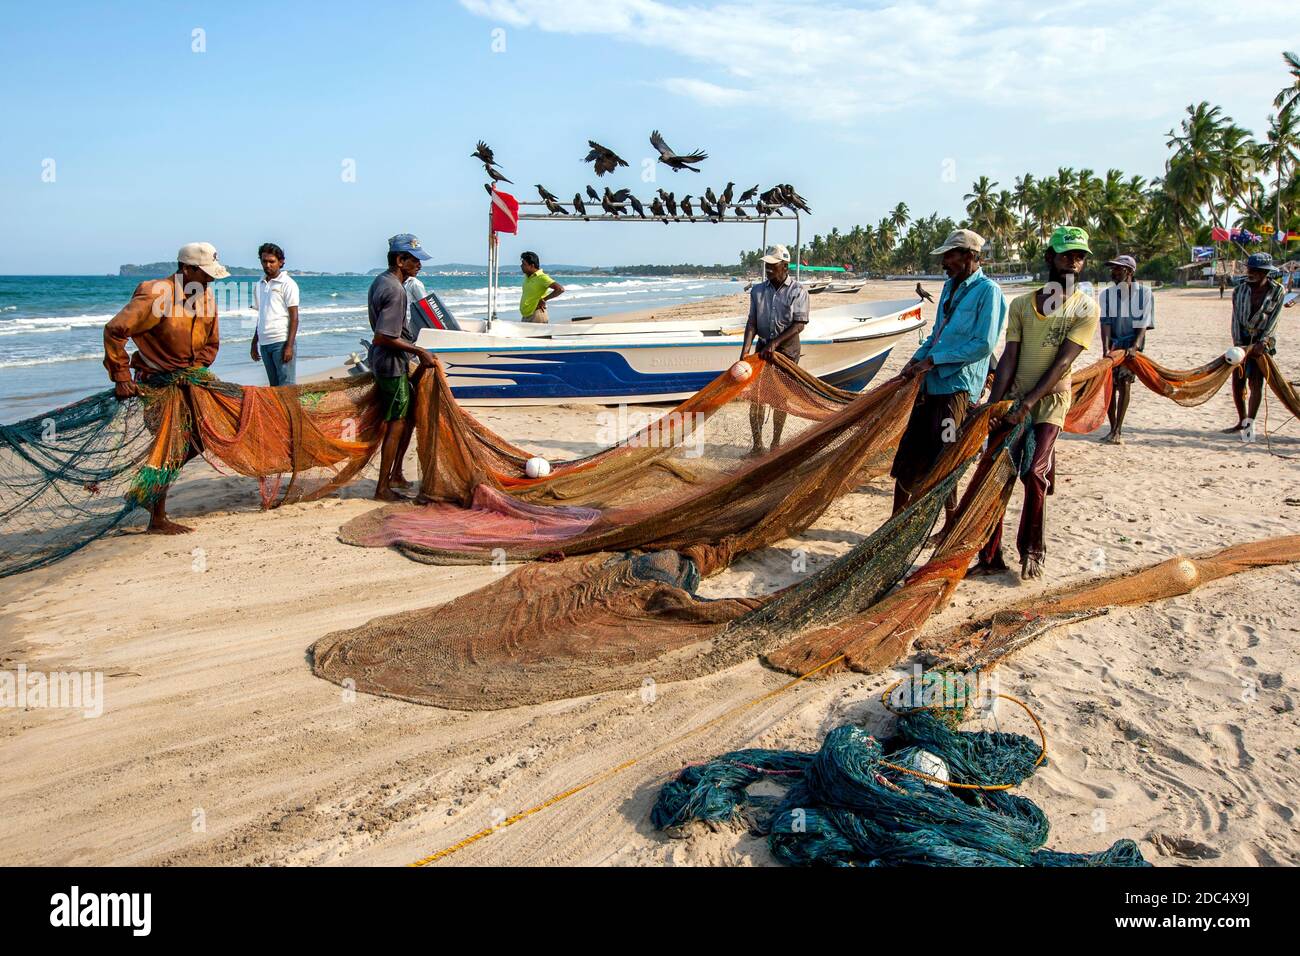 Seine fishermen pull in their fishing nets from the Indian Ocean